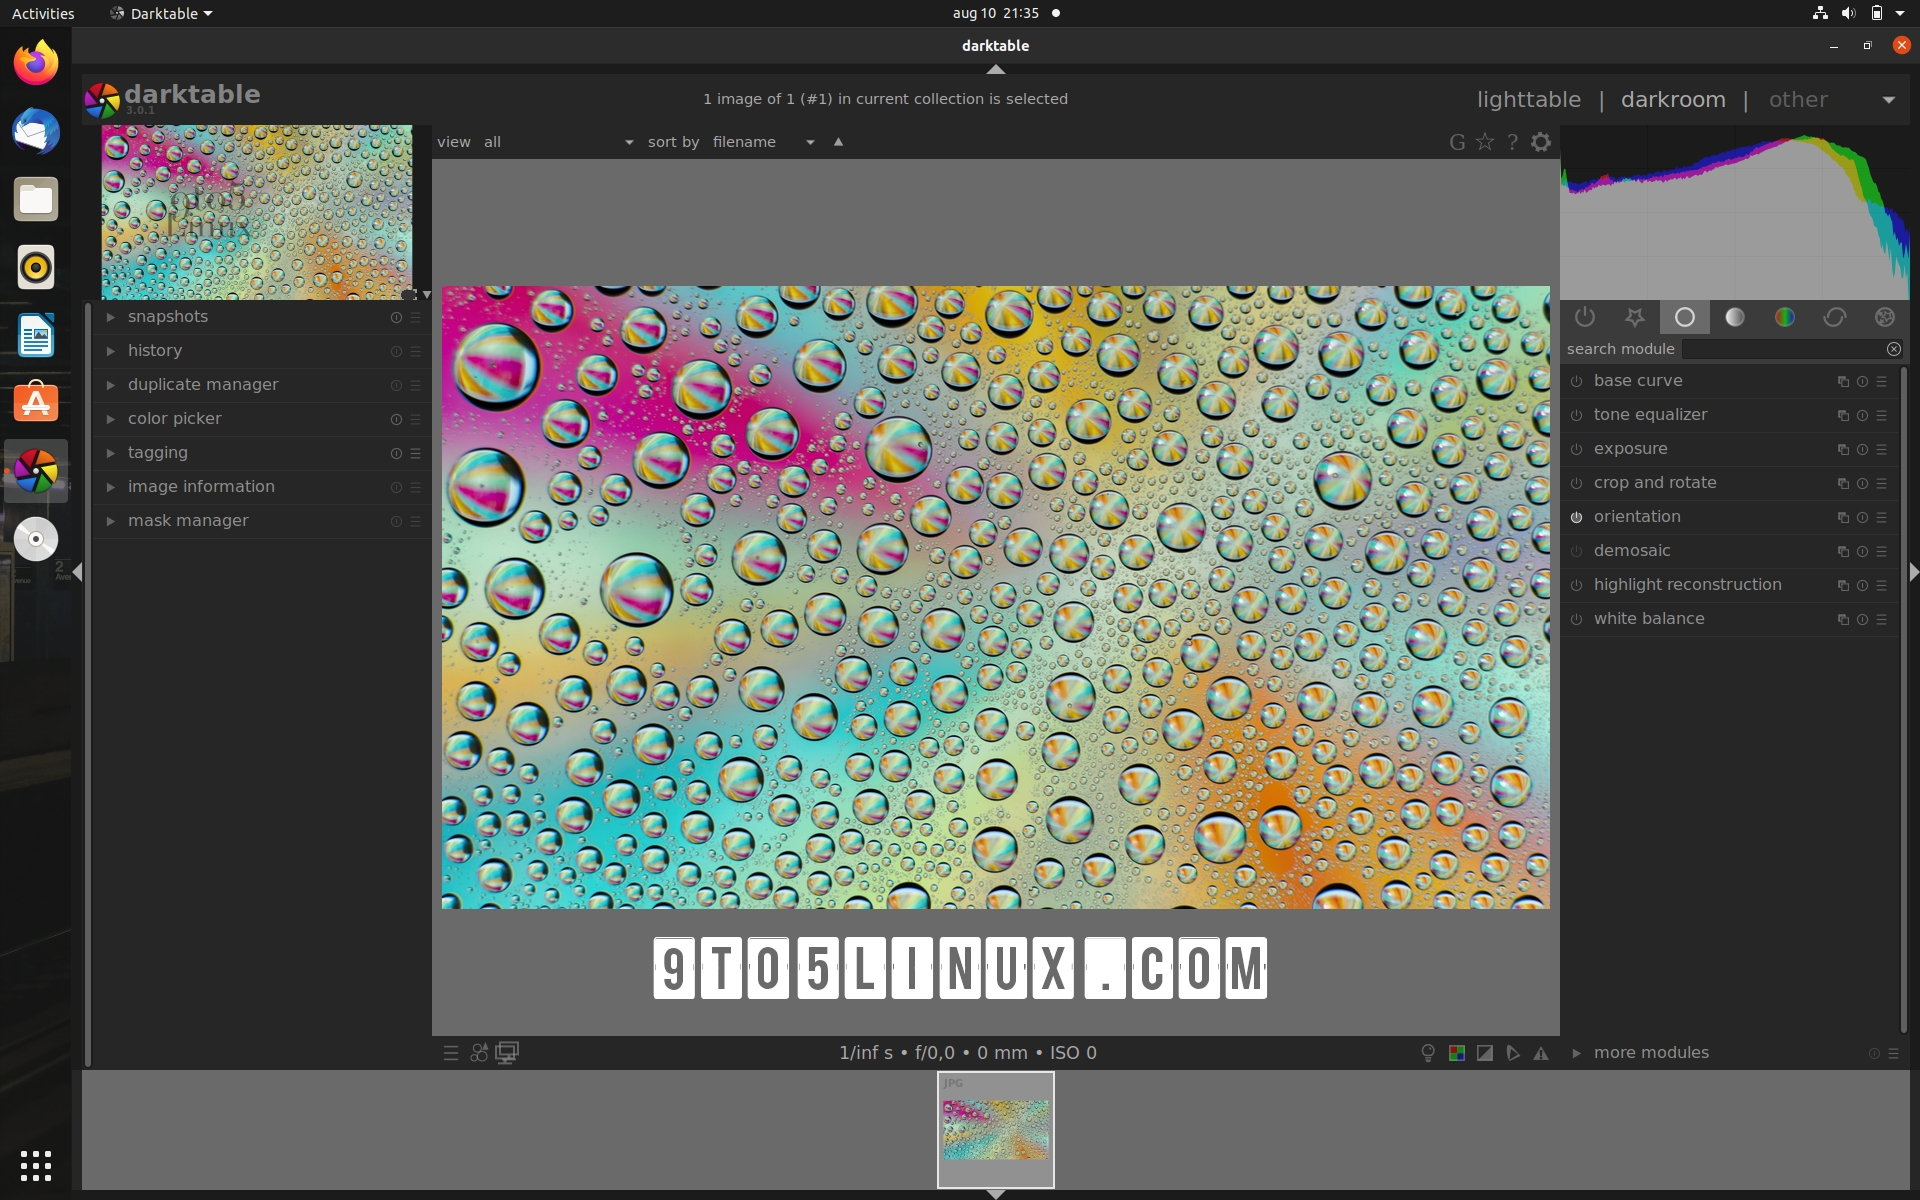 Darktable 3.6 Open-Source RAW Image Editor Released with Many New Features